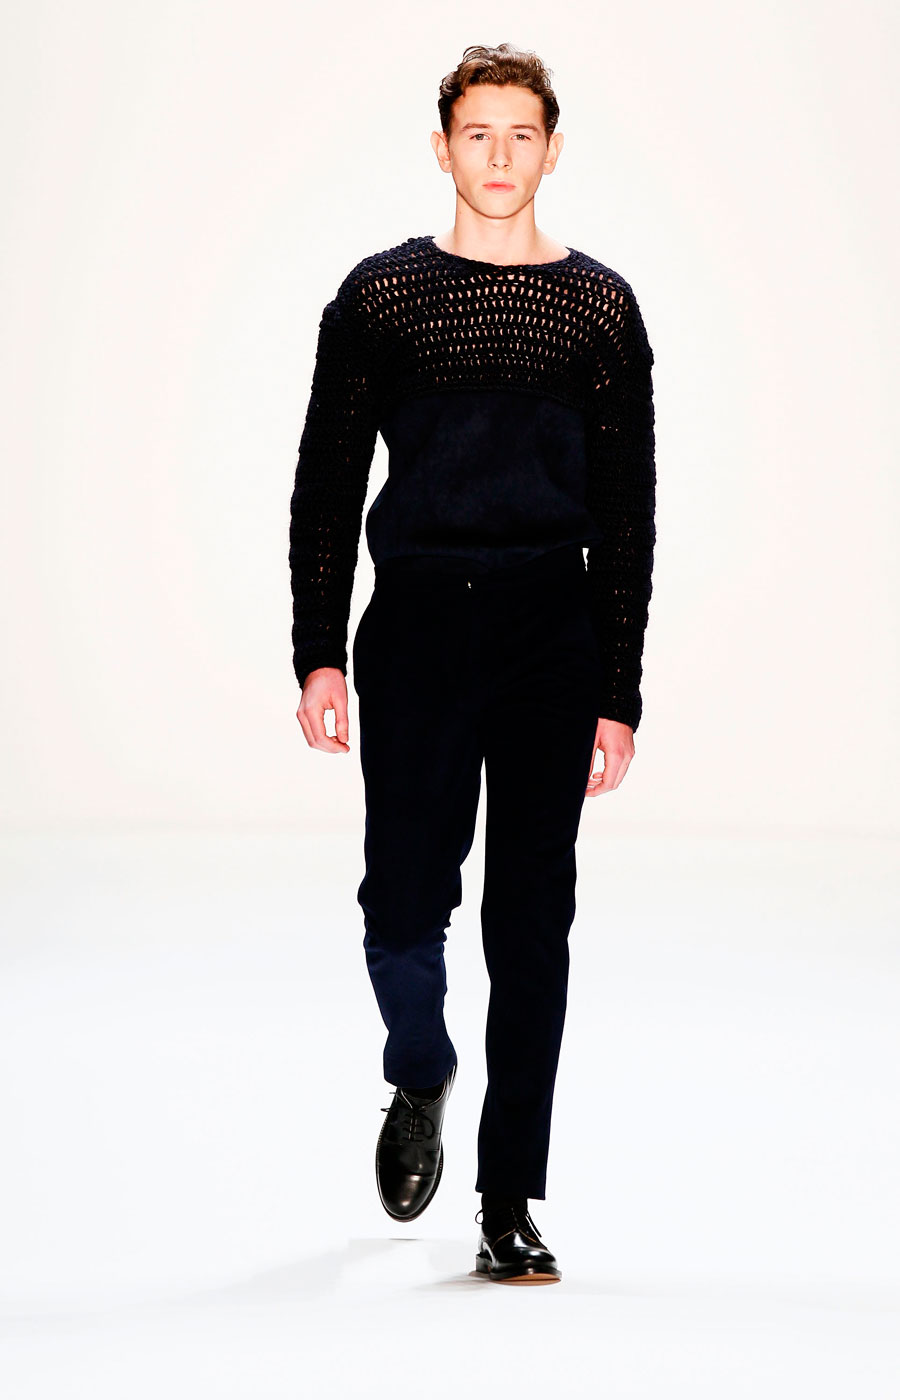 AW 2013 by Hien Le (9)